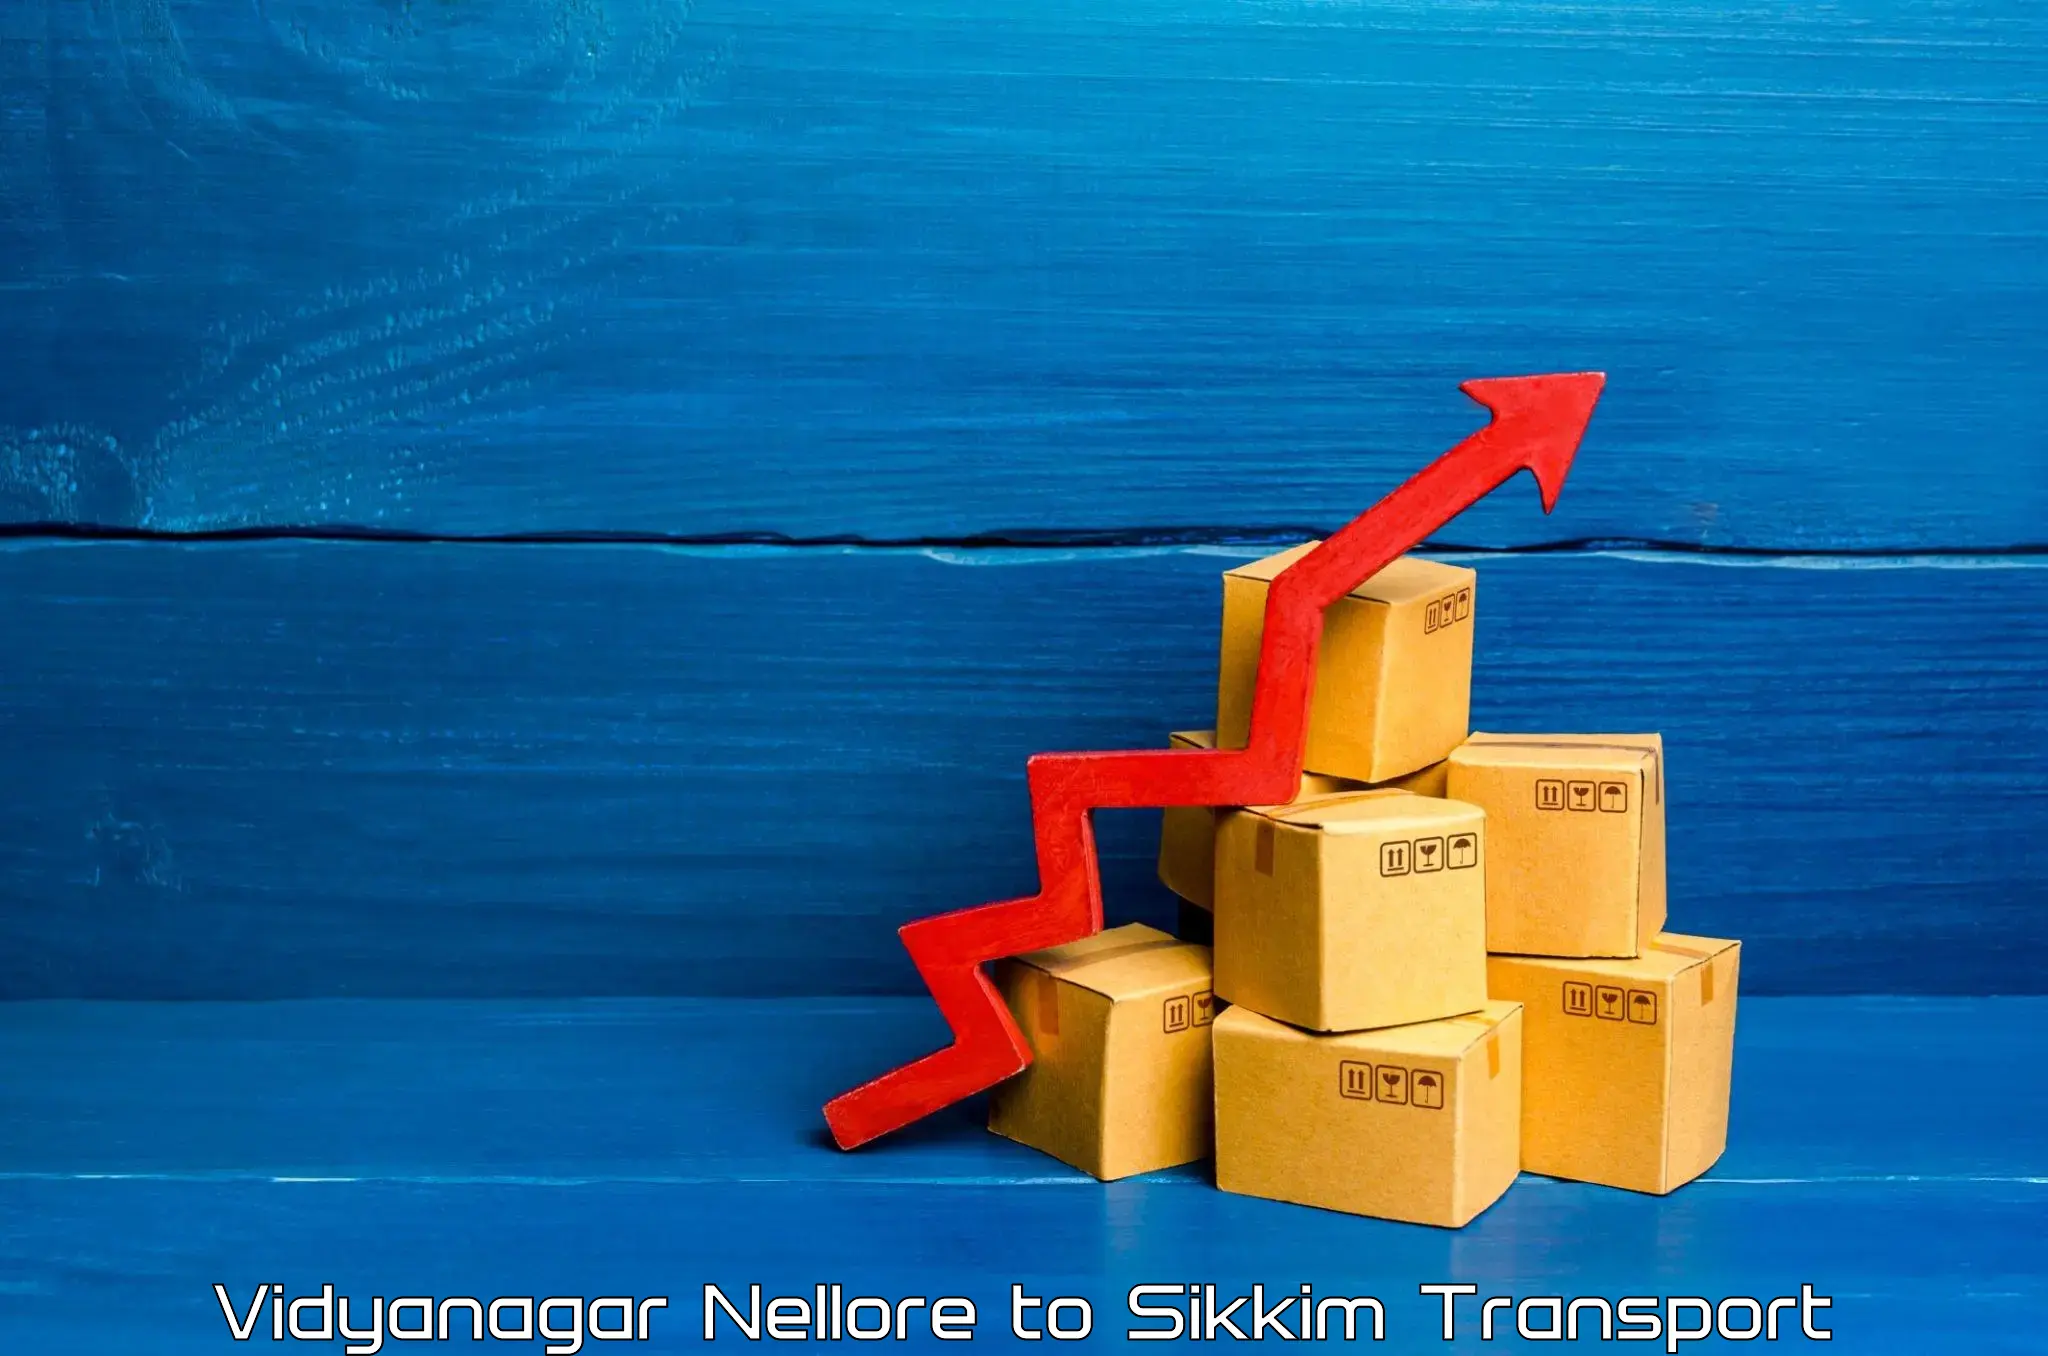 Commercial transport service Vidyanagar Nellore to South Sikkim